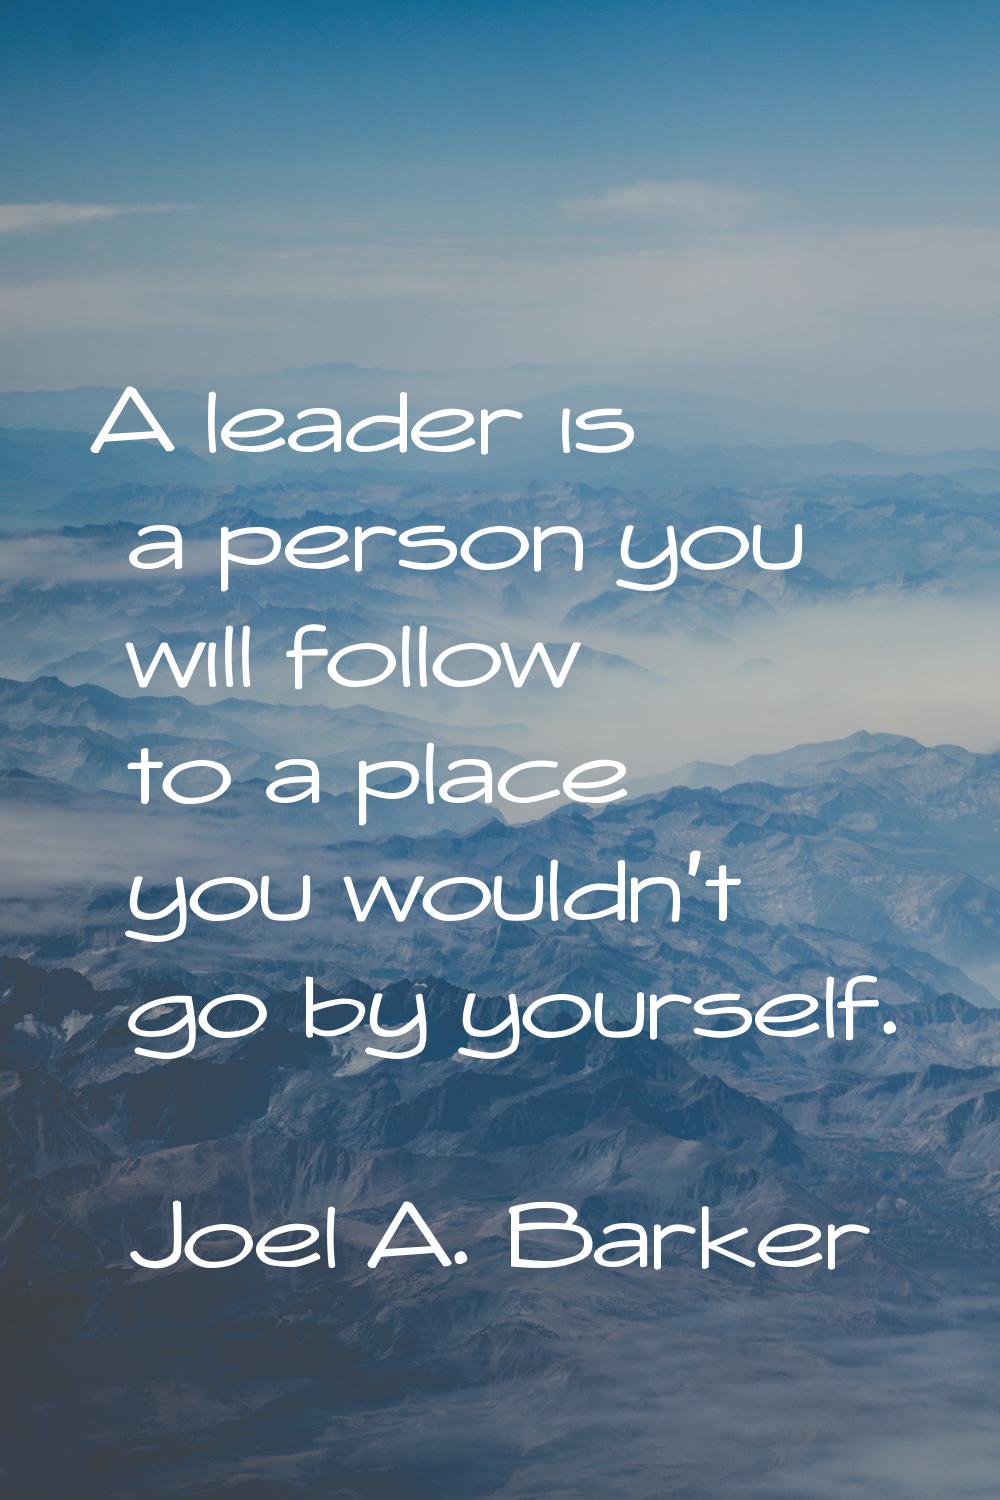 A leader is a person you will follow to a place you wouldn't go by yourself.